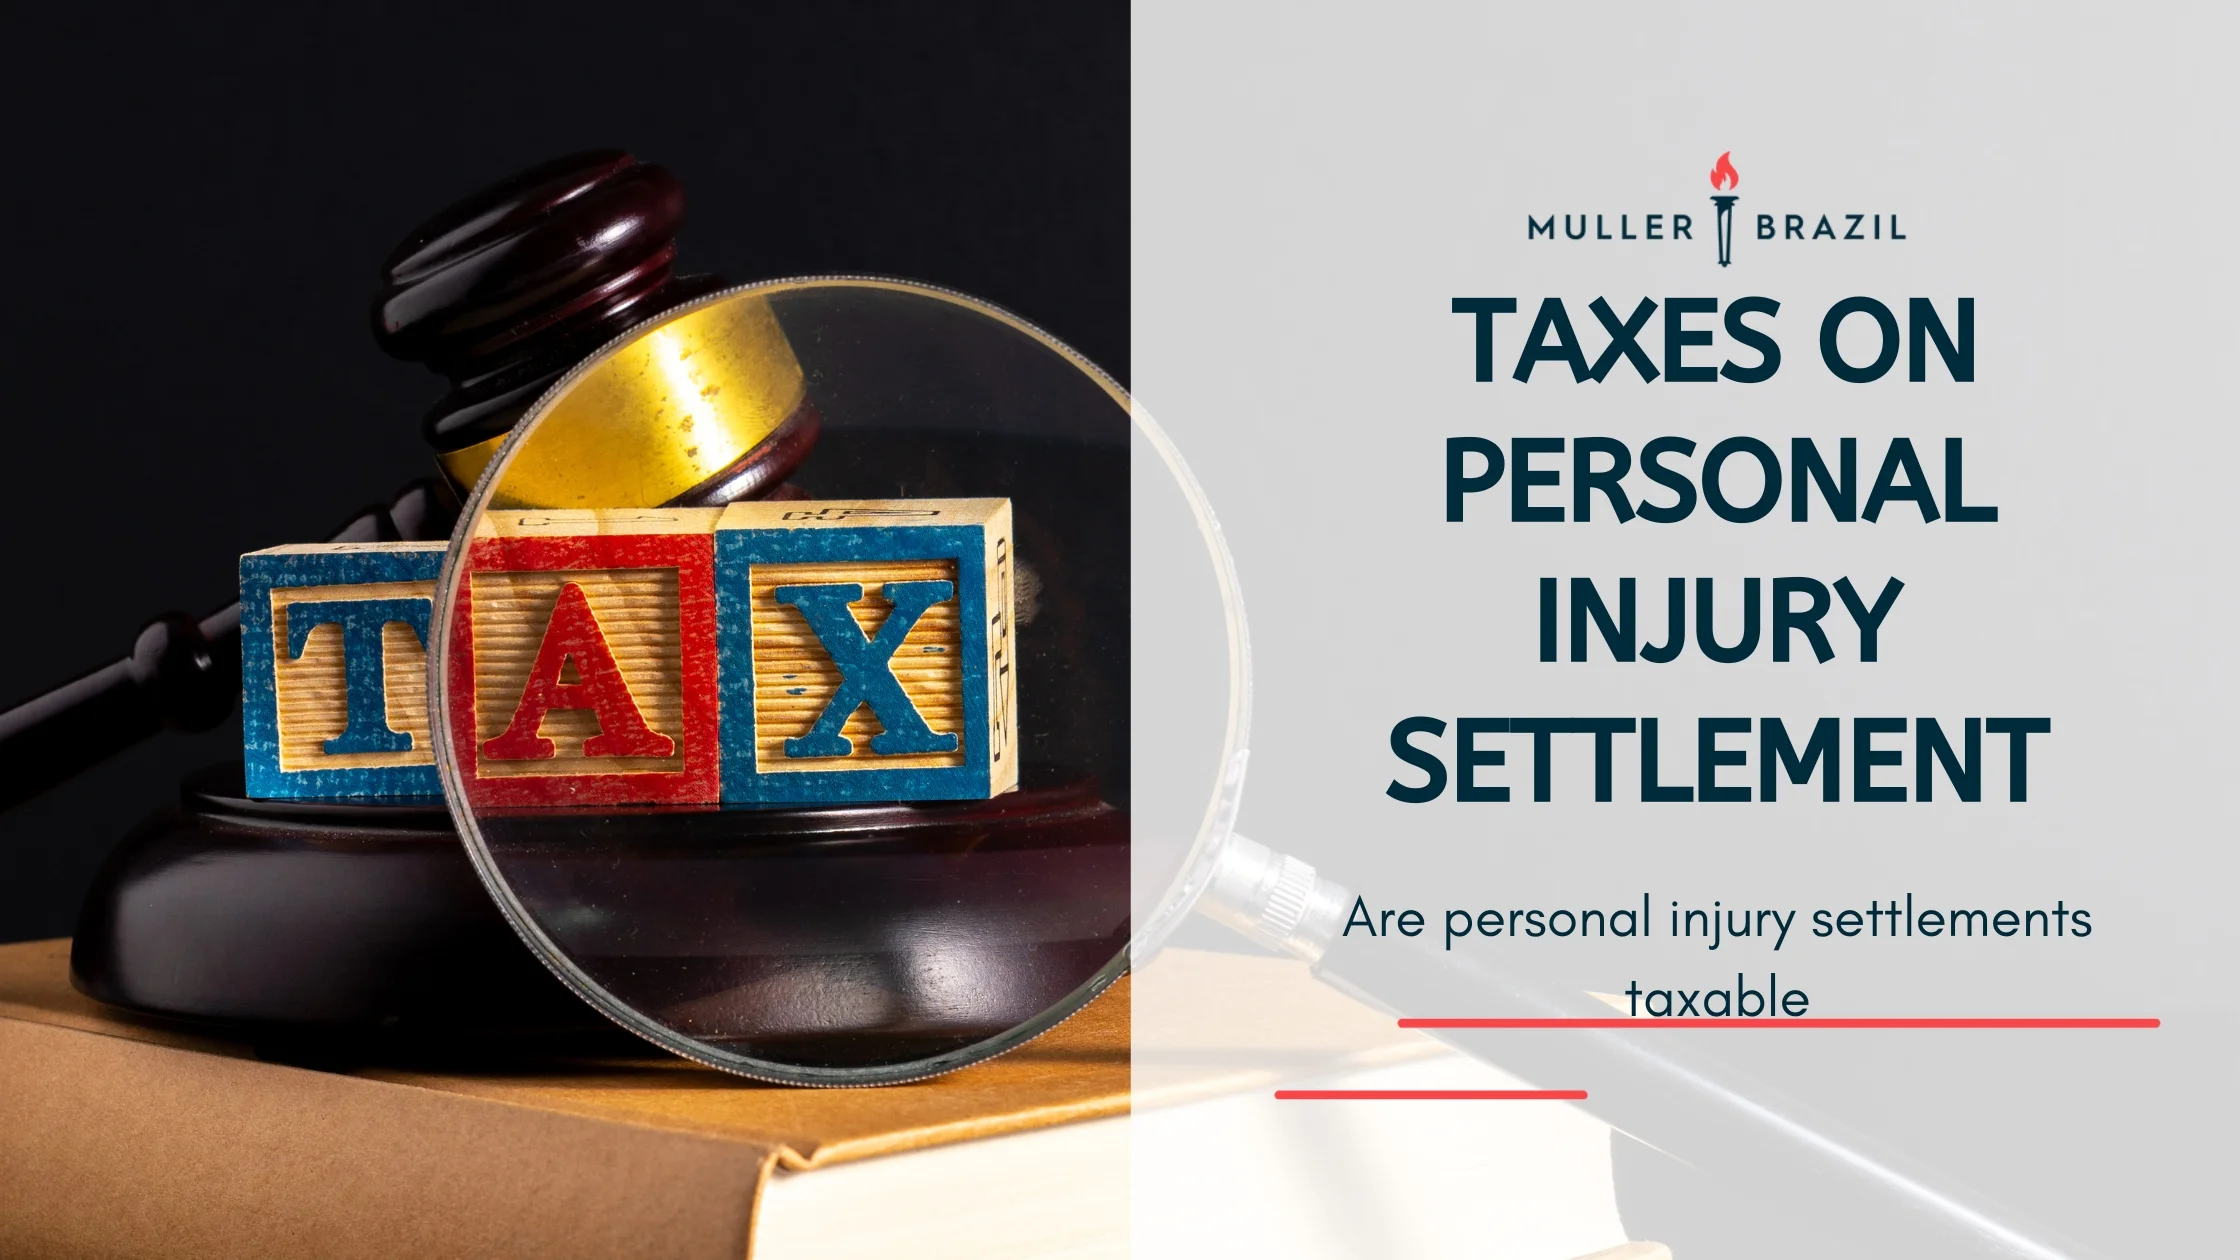 Blog featured image of a gavel with a wooden blocks and a book and a caption that says “Taxes on Personal Injury Settlement“